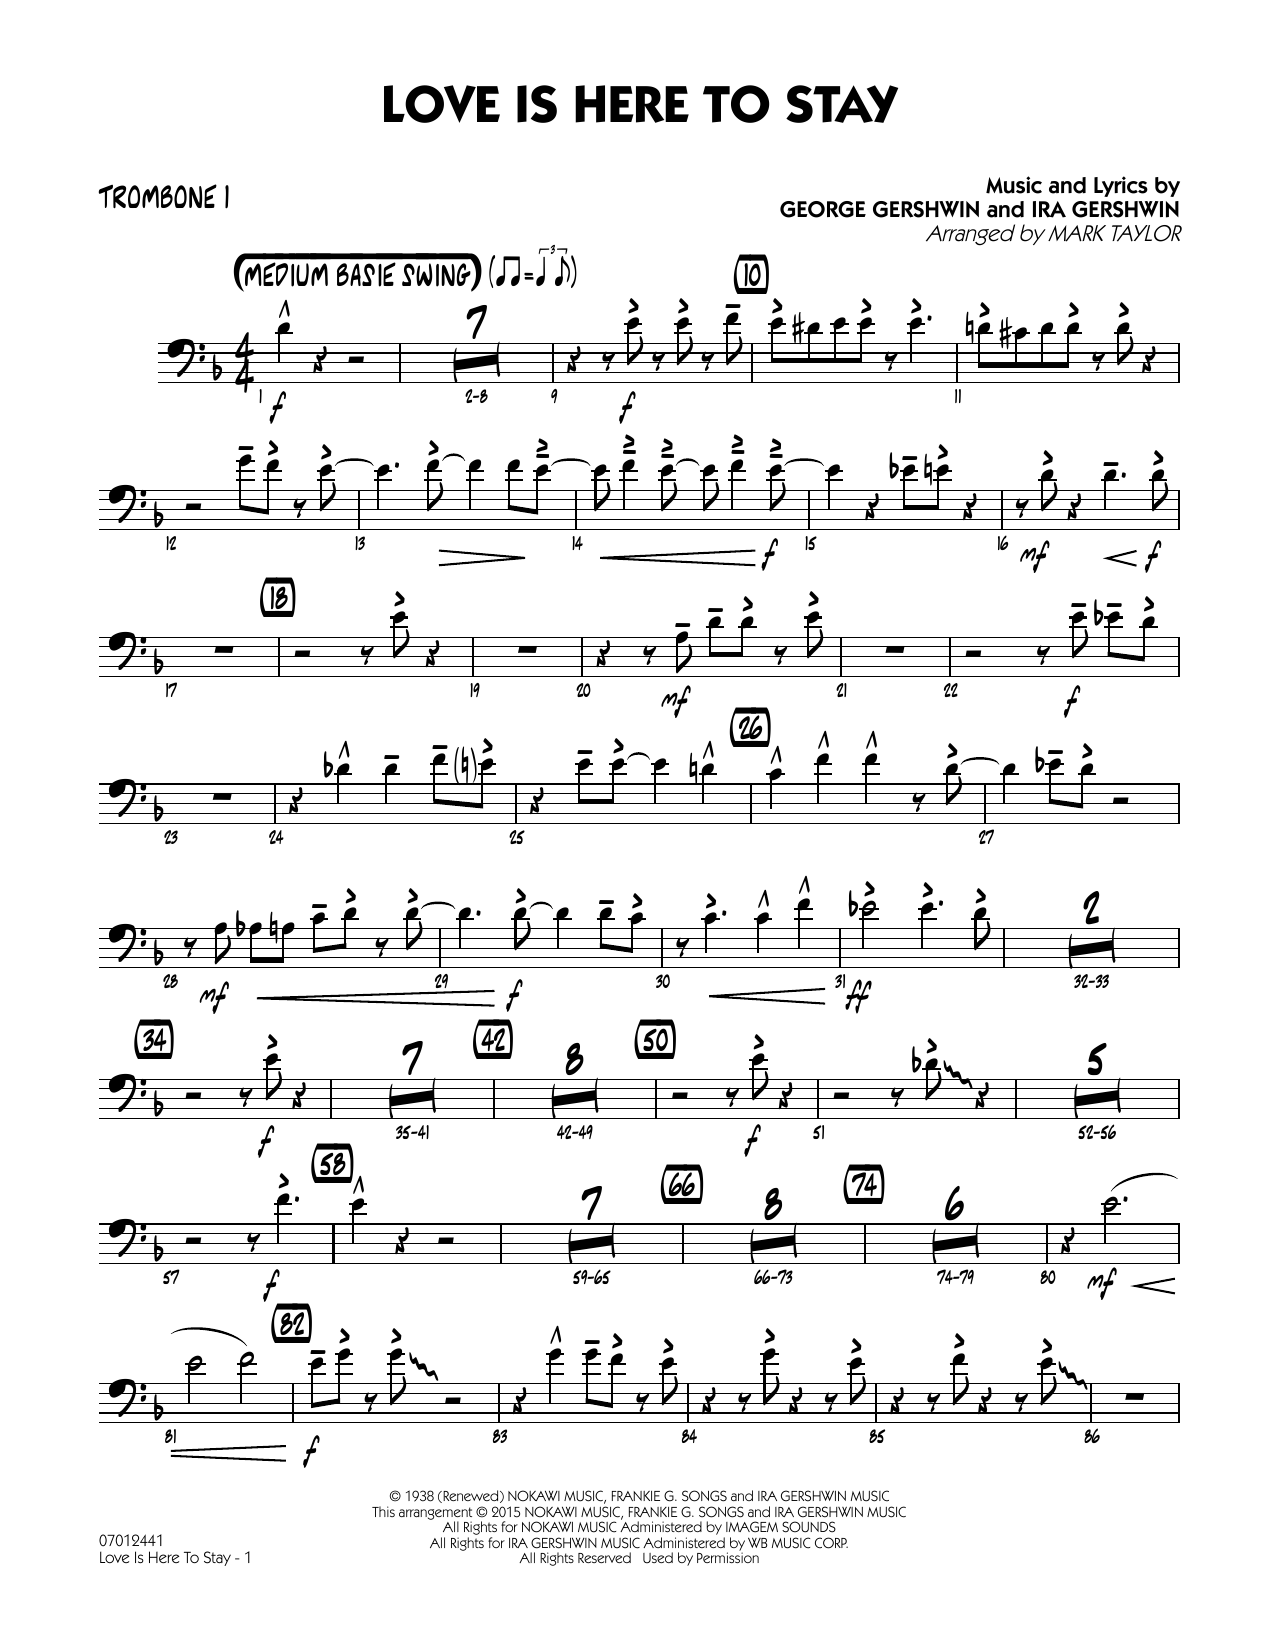 Mark Taylor Love Is Here to Stay - Trombone 1 sheet music notes and chords. Download Printable PDF.